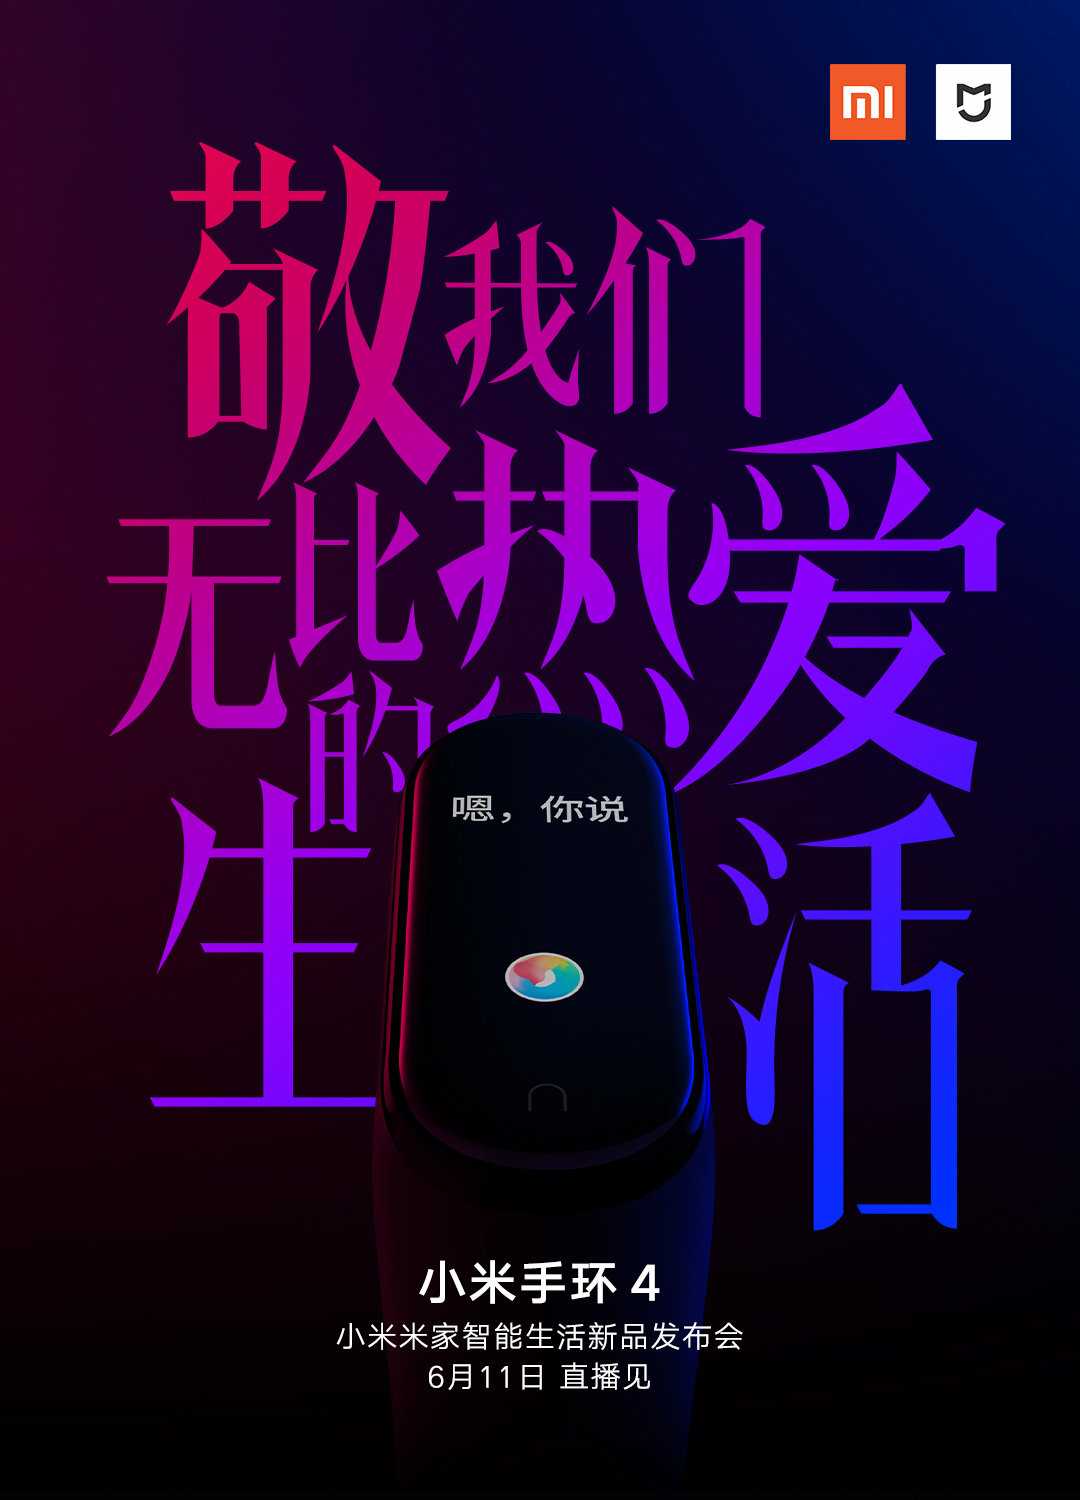 Mi Band 4 Launch Poster